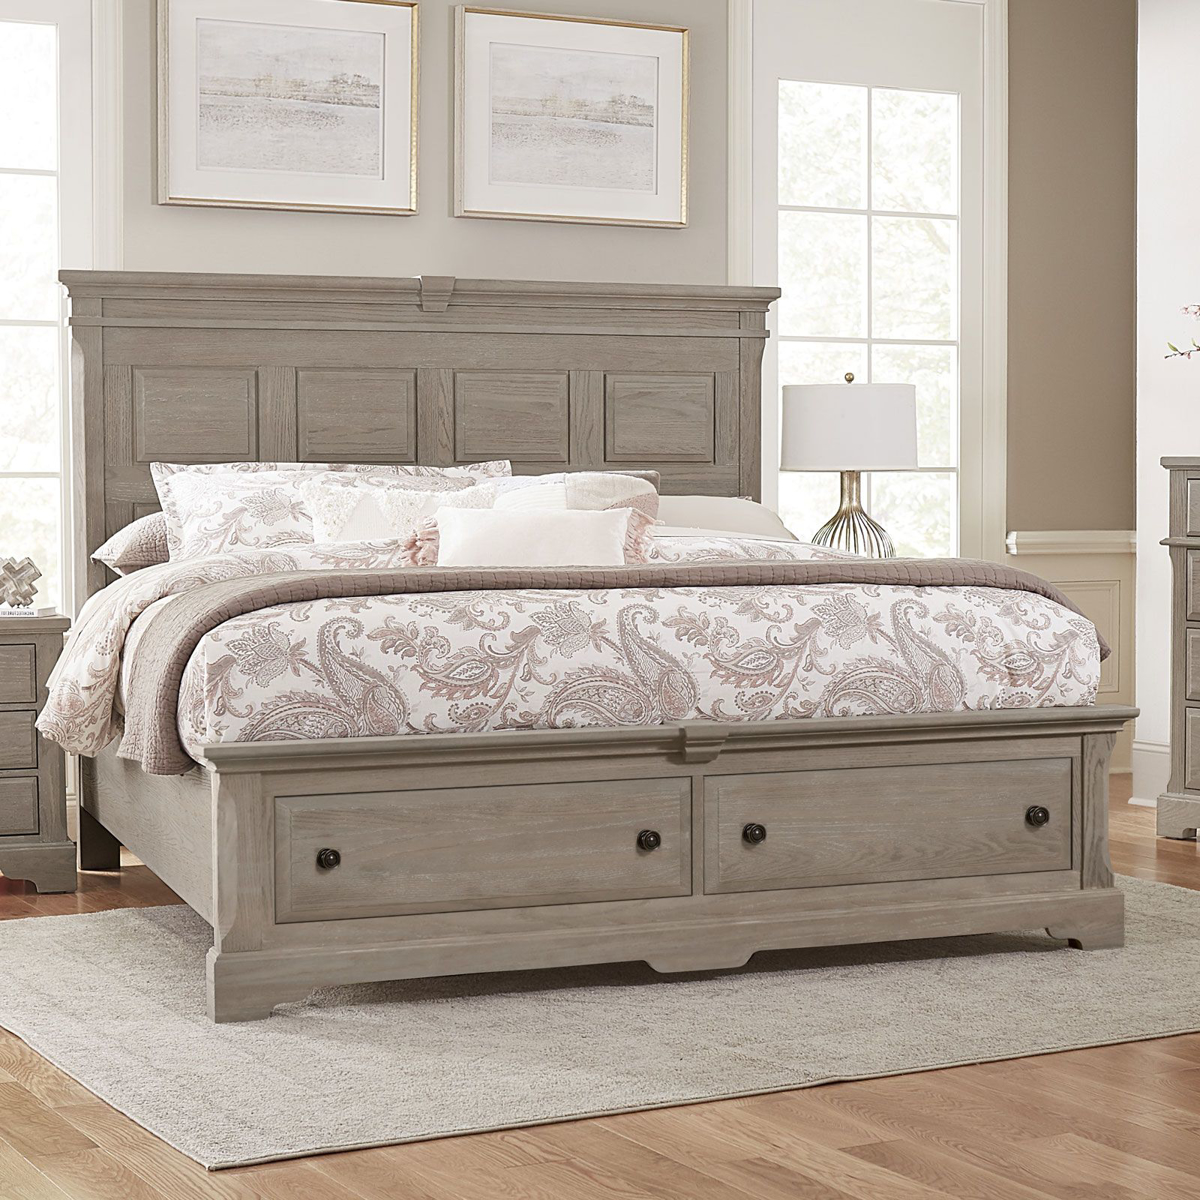 Picture of Queen Greystone Storage Bed